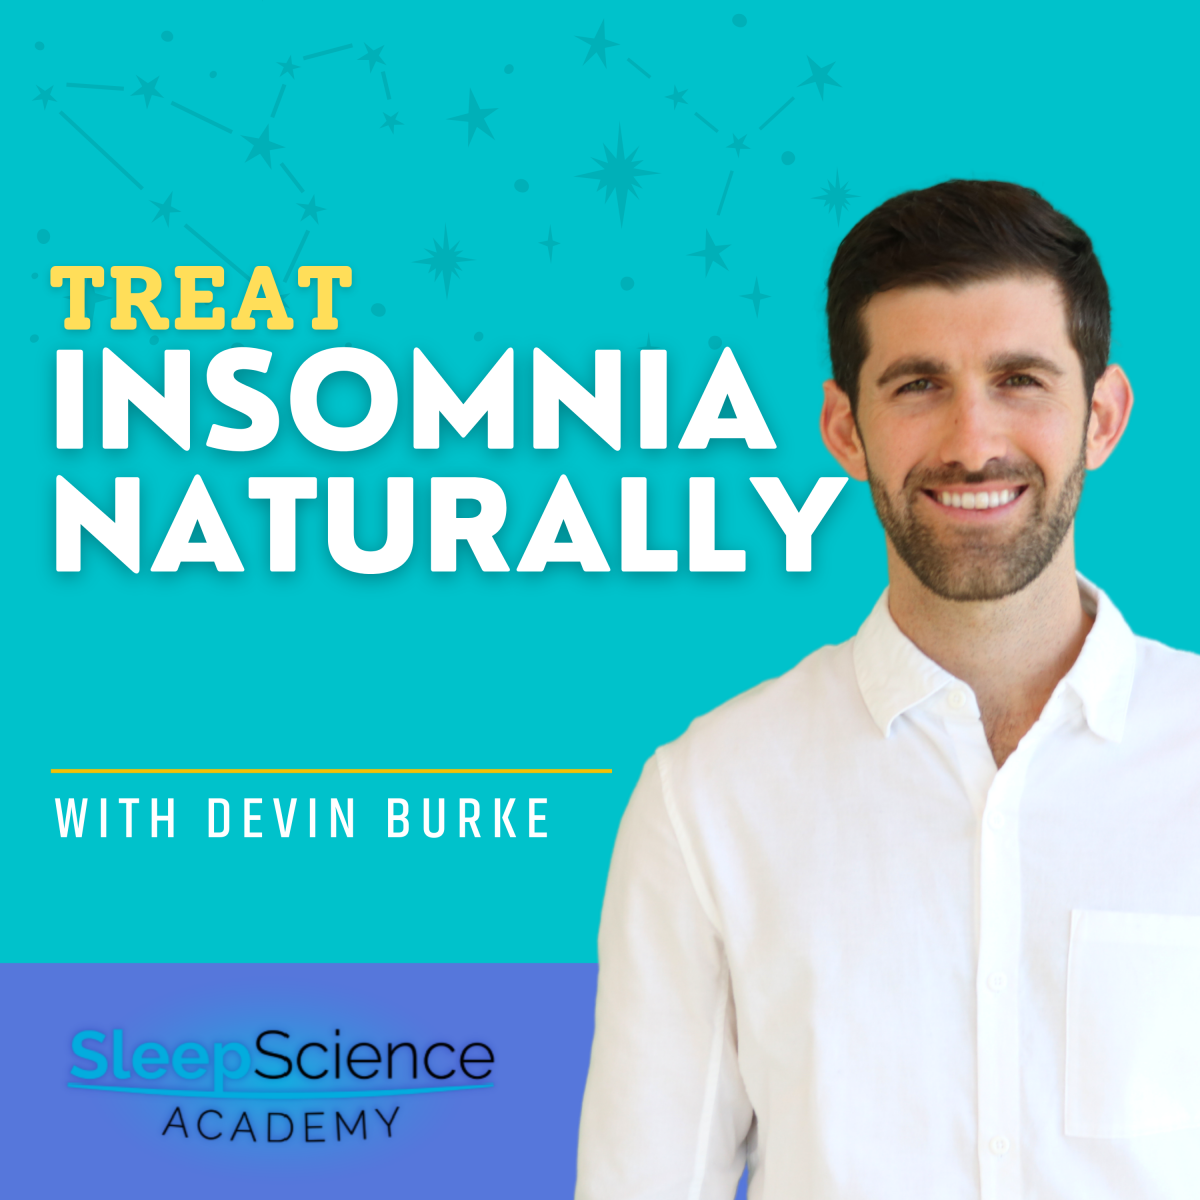 how-to-treat-insomnia-naturally-without-medication-sleep-science-academy